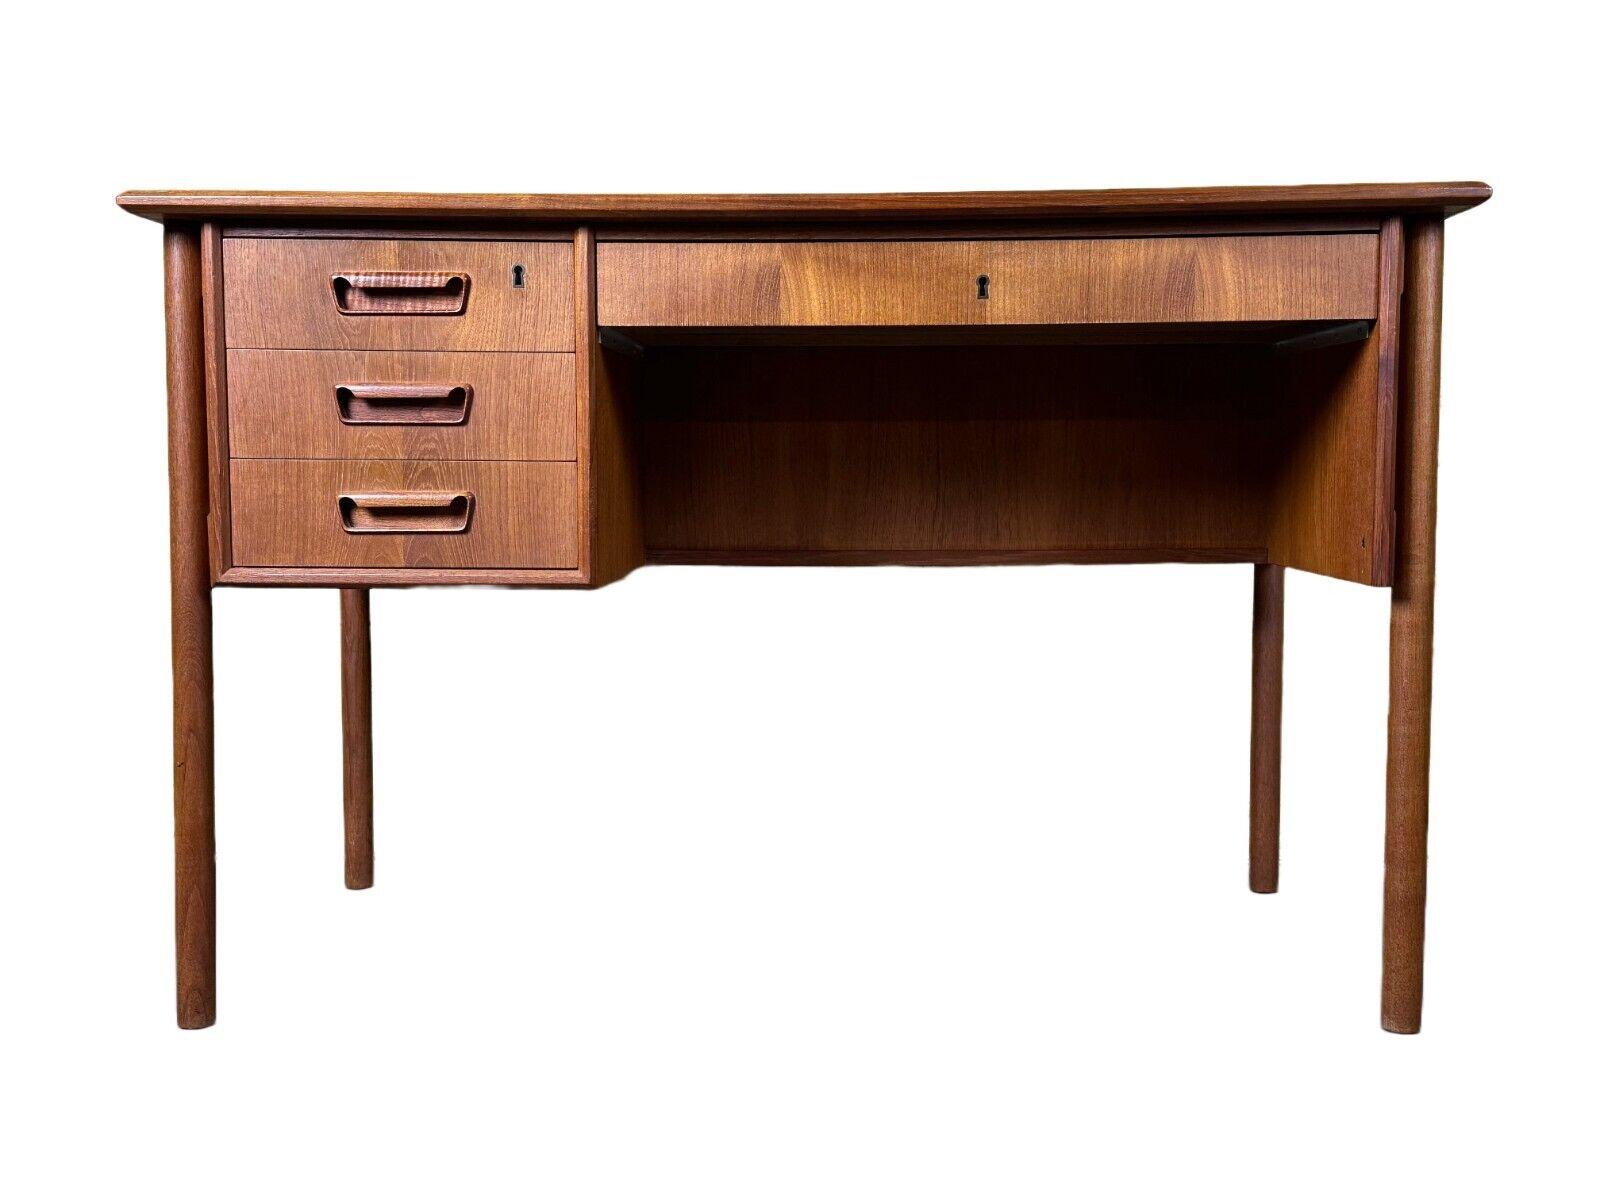 60s 70s teak writing desk by Gunnar Nielsen for Tibergaard

Object: Writing Desk

Manufacturer: Tibergaard

Condition: good - vintage

Age: around 1960-1970

Dimensions:

Width = 114cm
Depth = 63.5cm
Height = 73cm

Material: teak

Other notes:

The